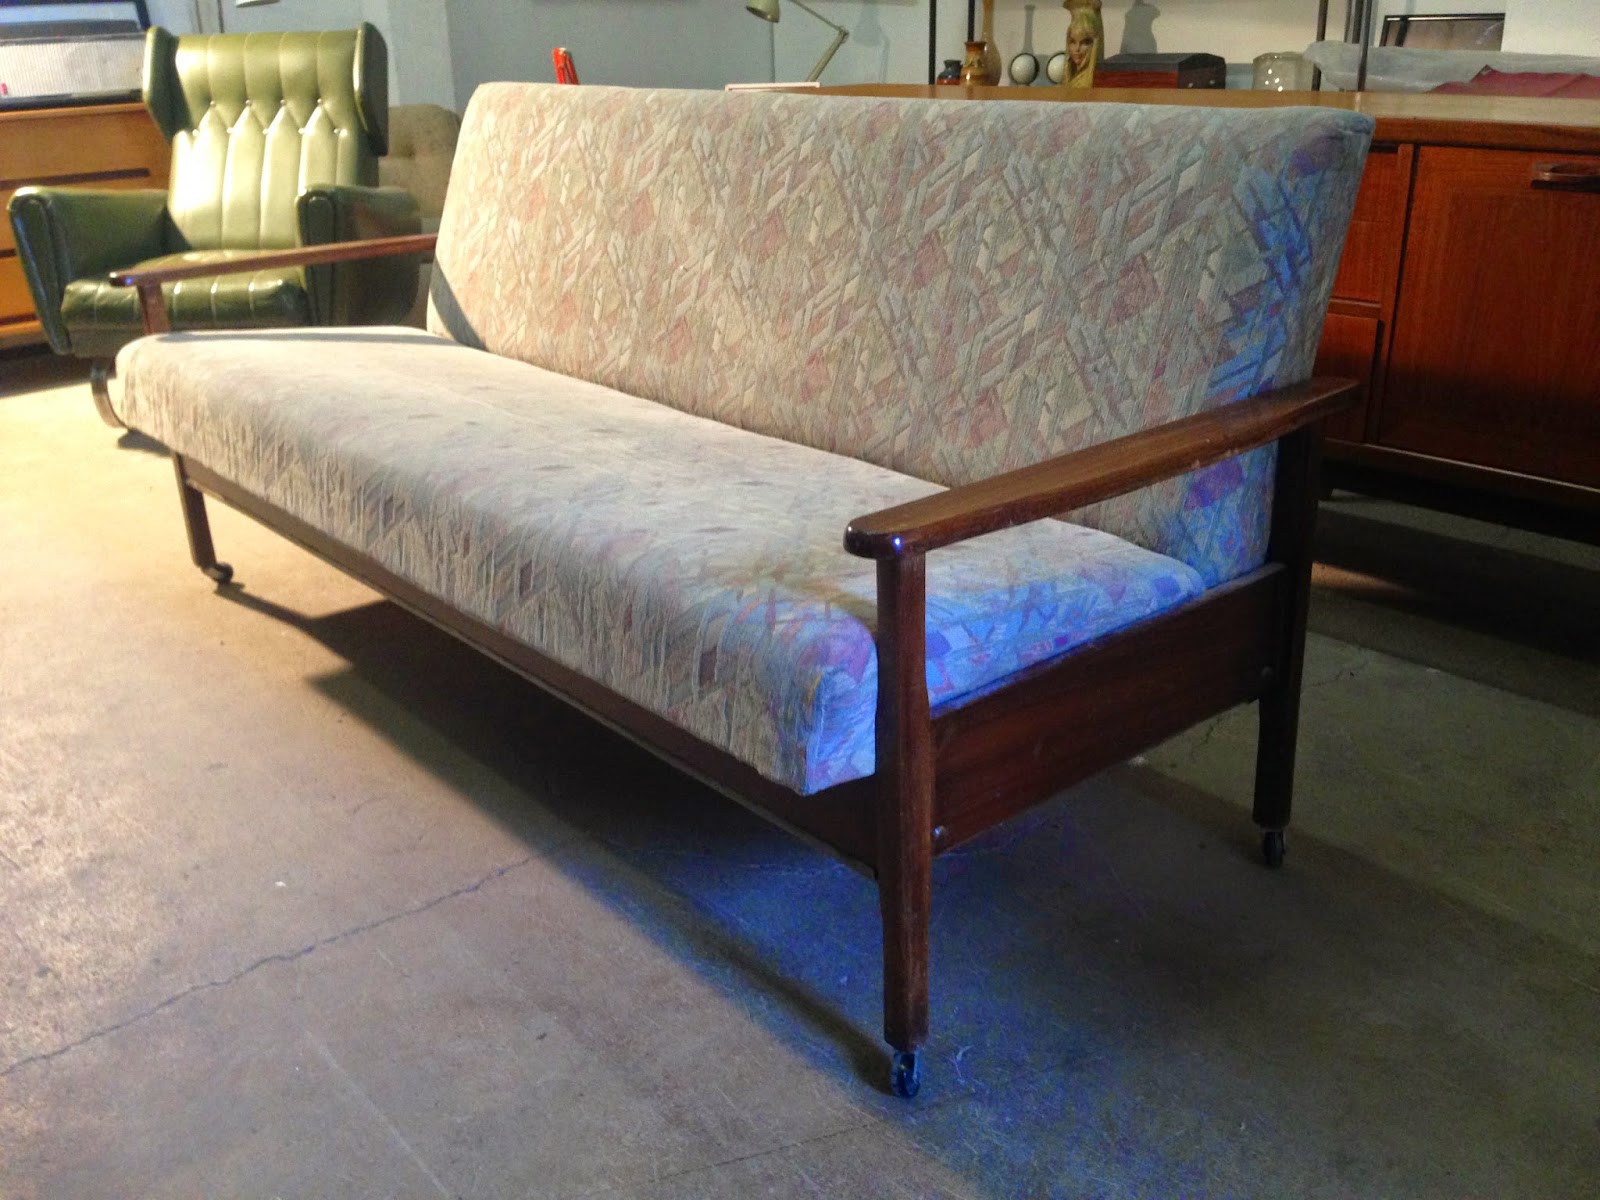 70s style sofa bed